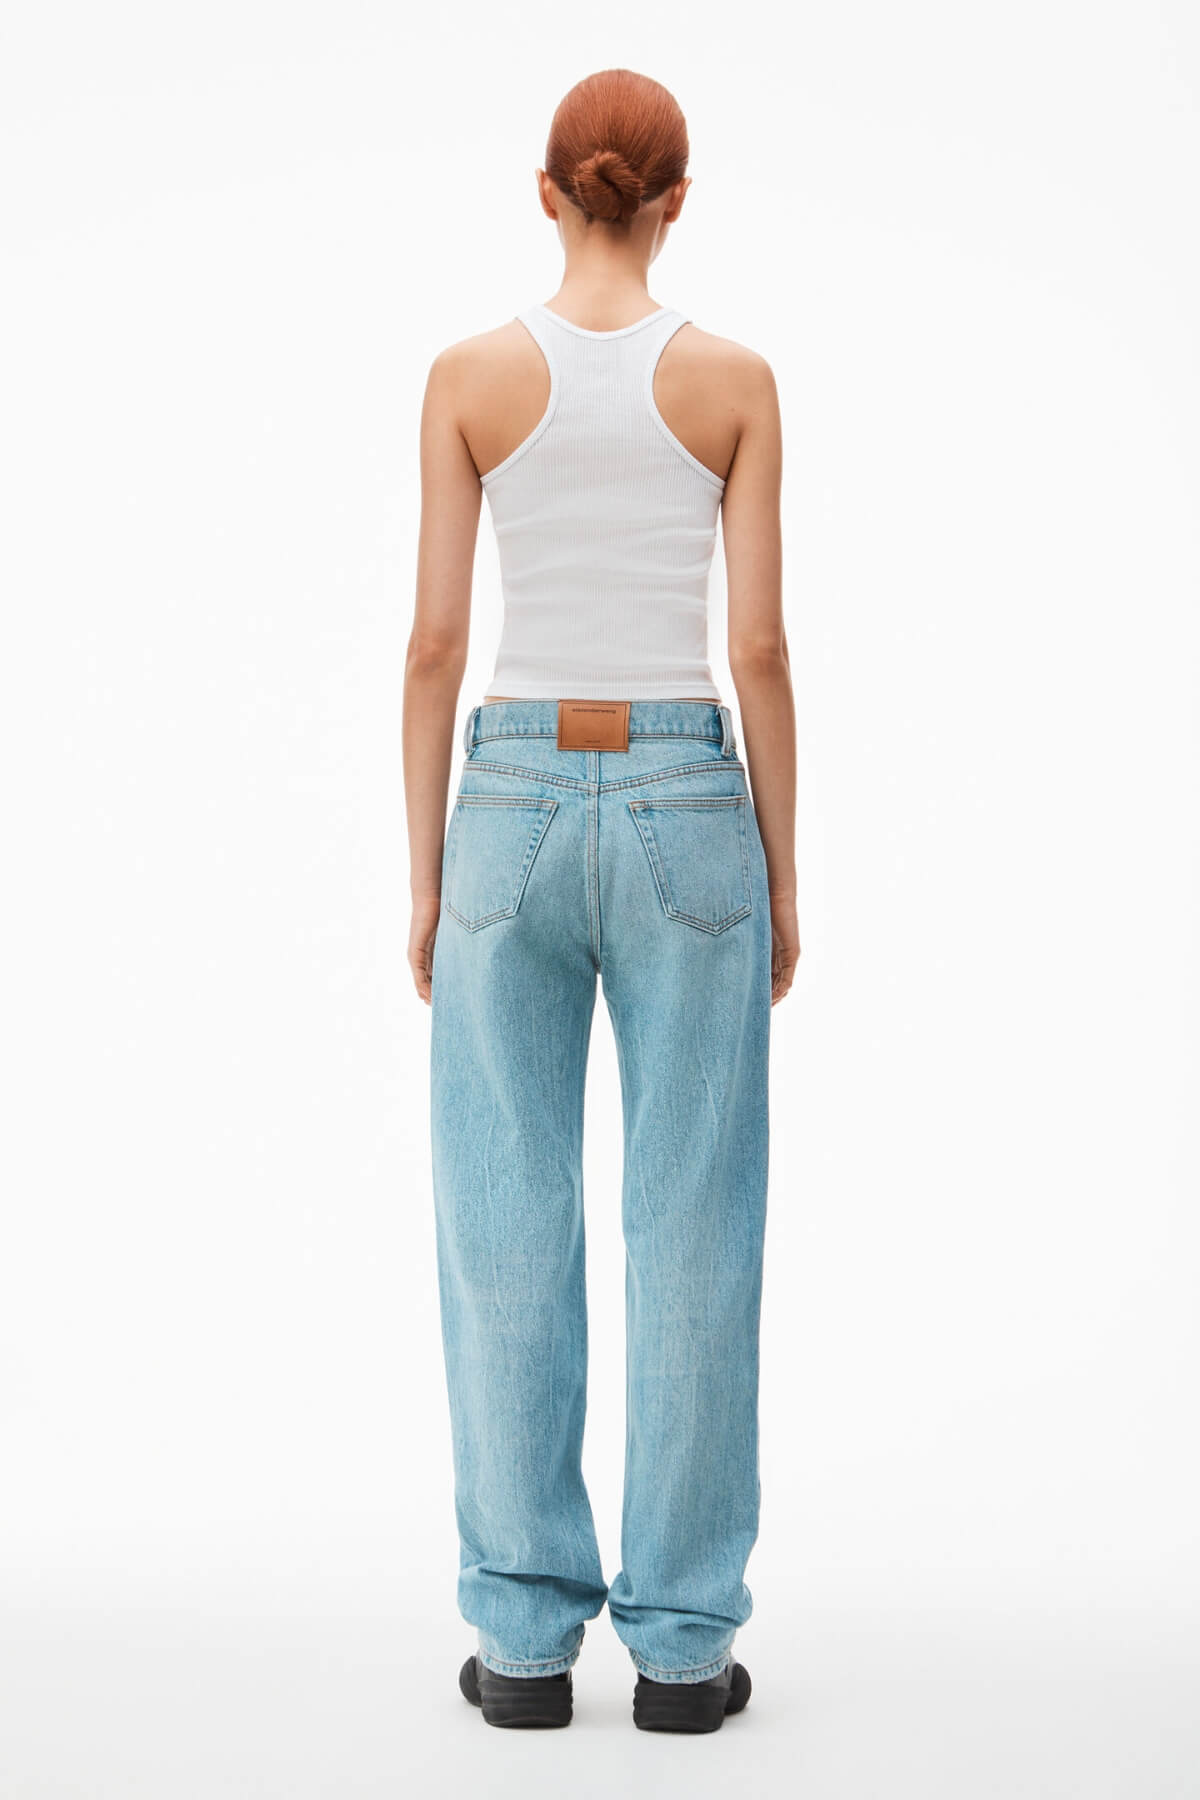 Alexander Wang EZ Mid Rise Relaxed Straight Jeans - Vintage Faded Indigo